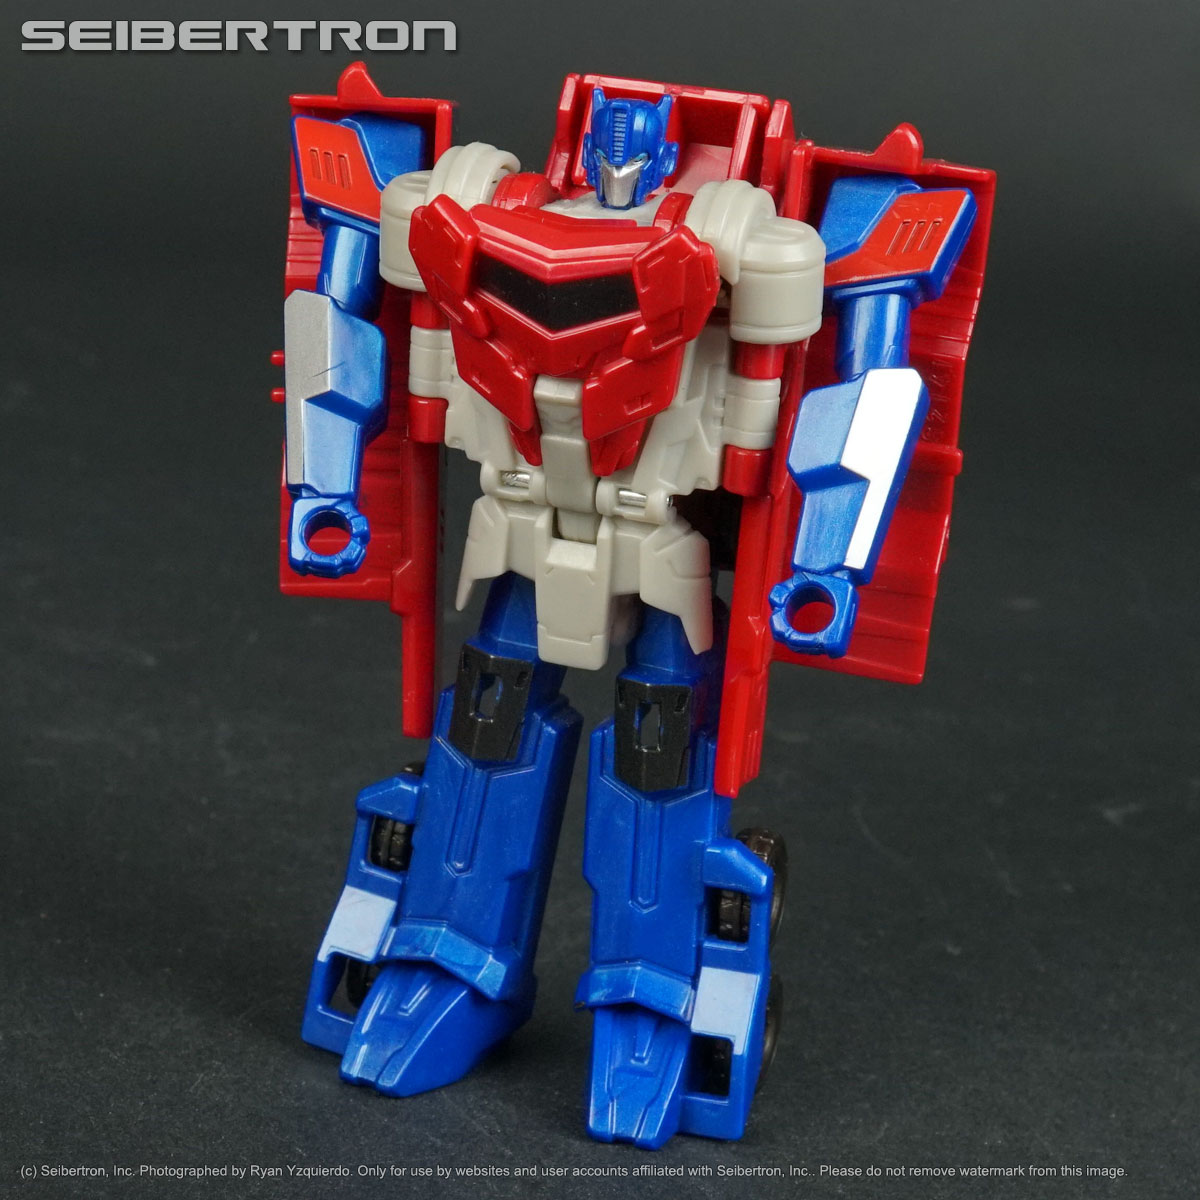 OPTIMUS PRIME Transformers Robots In Disguise 1-Step One Target 2015 211112A